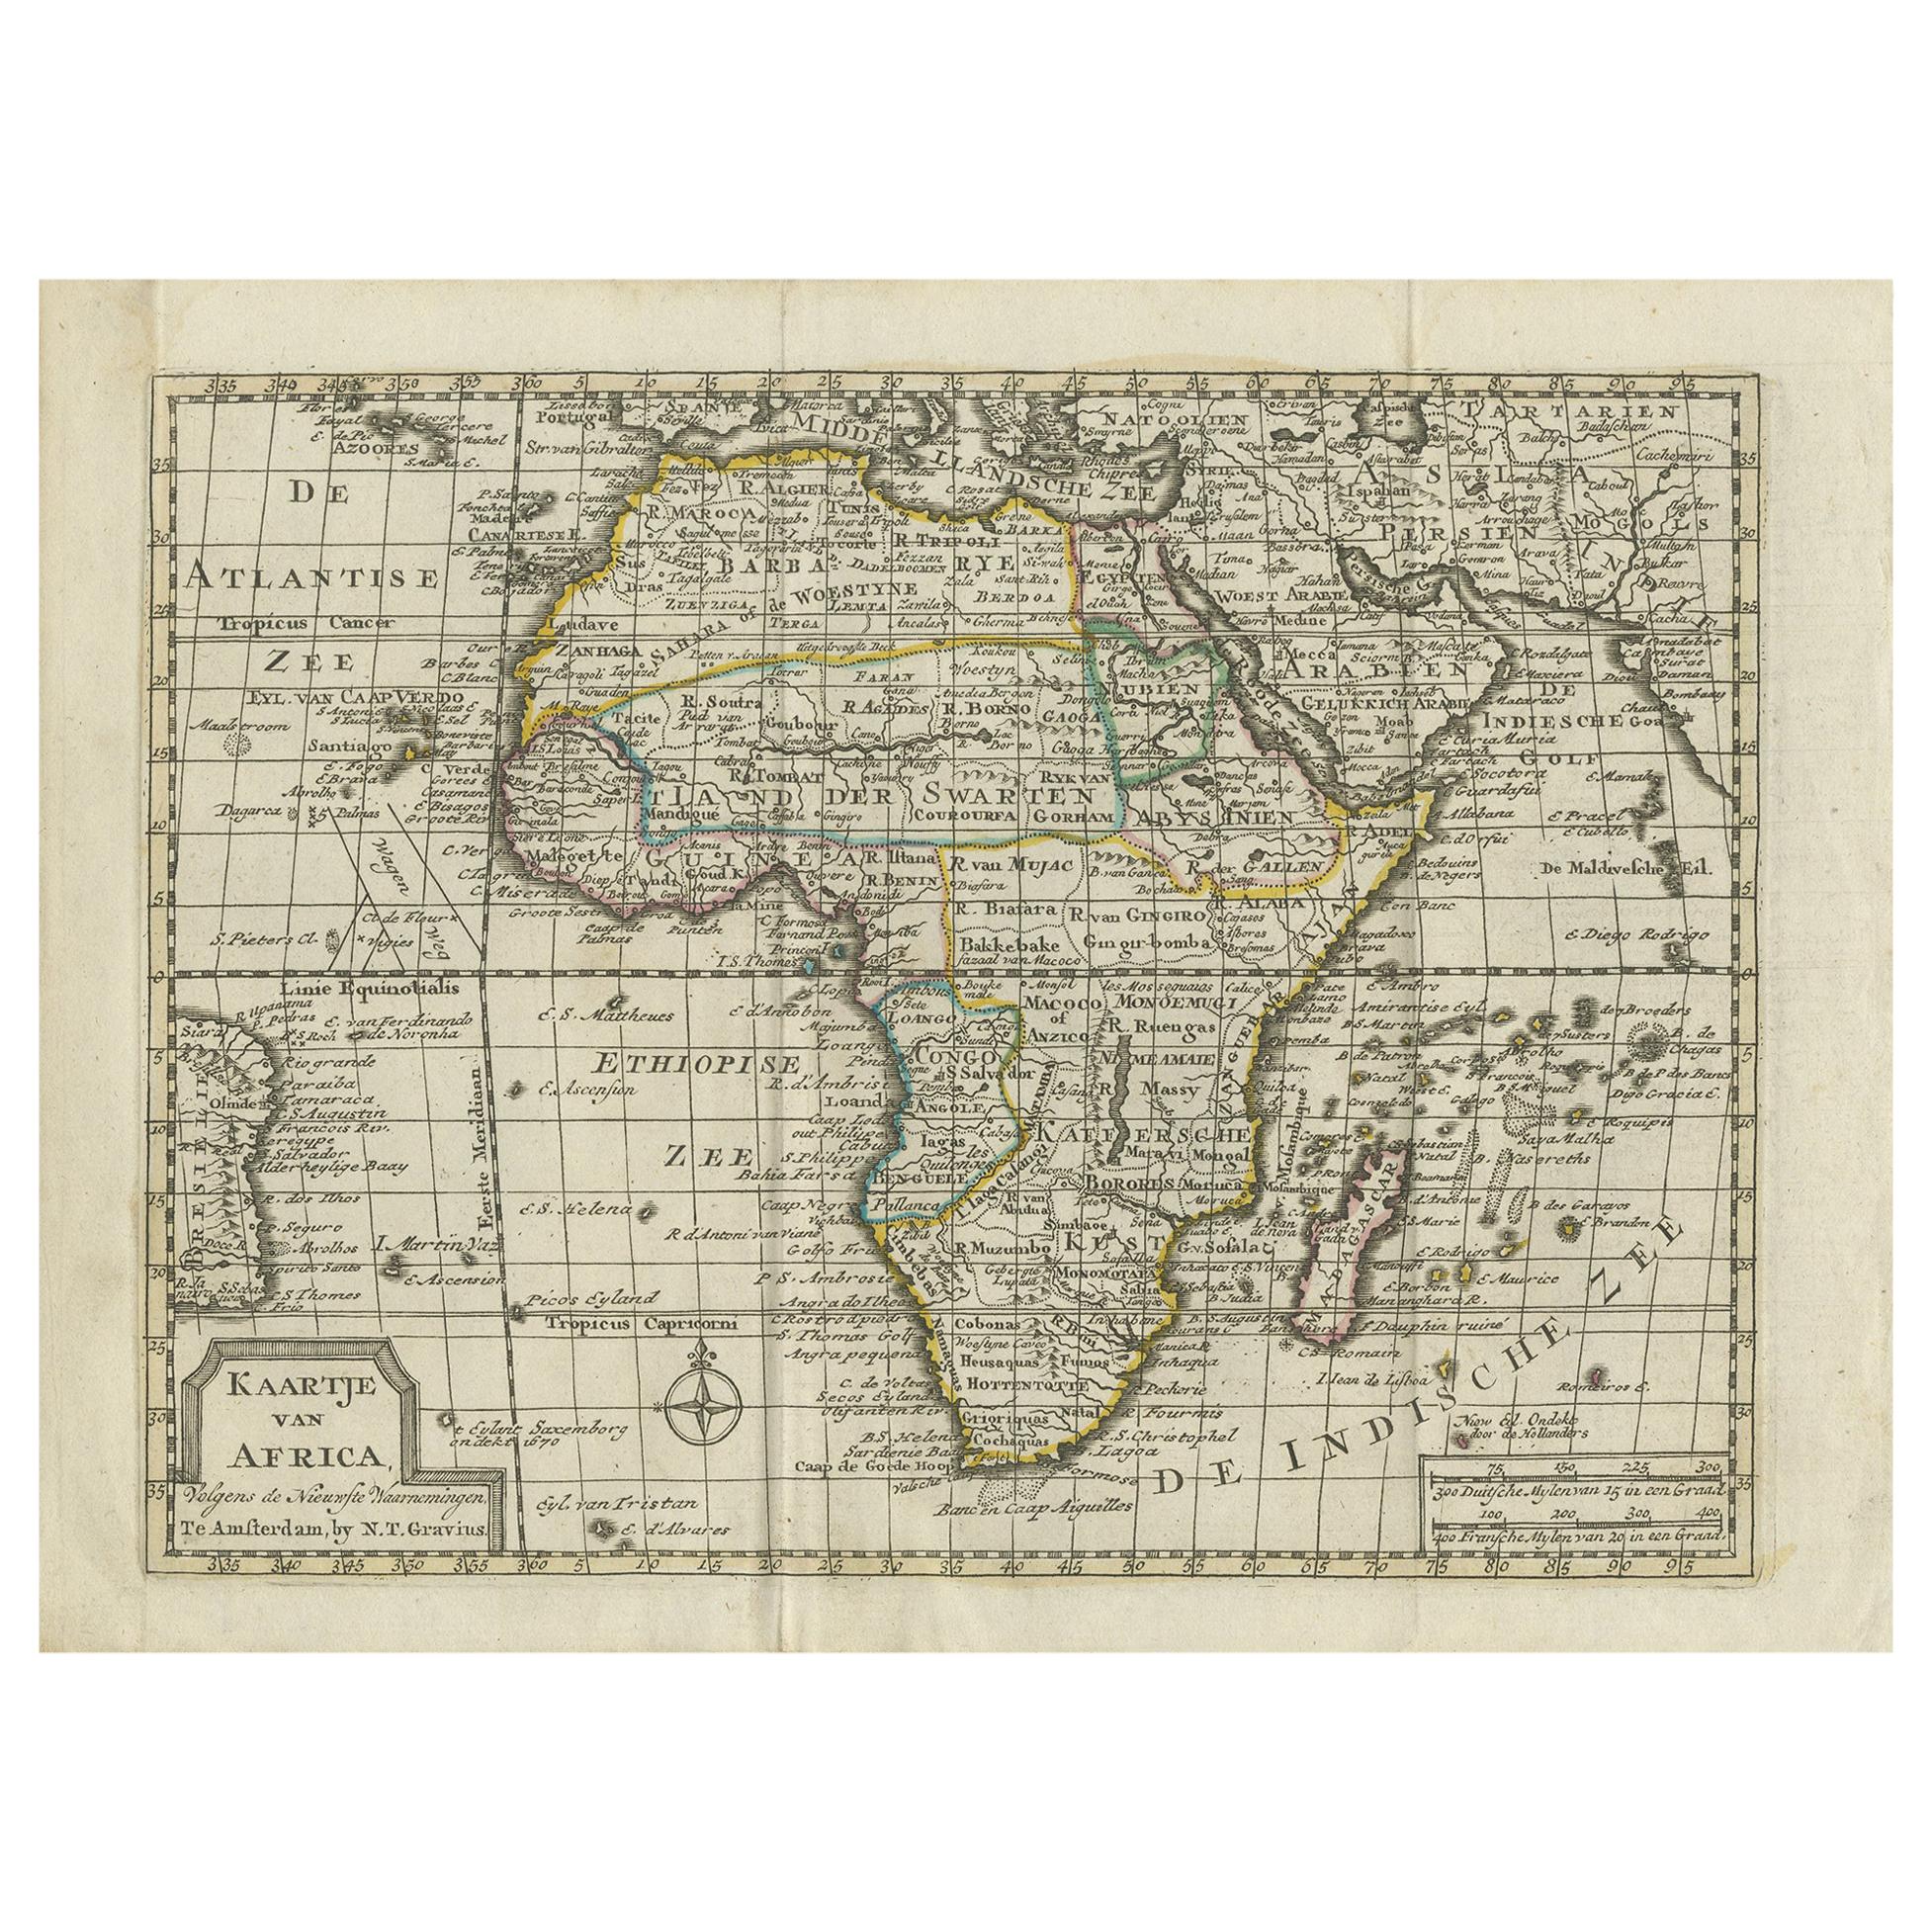 Antique Map of Africa by Keizer & de Lat, 1788